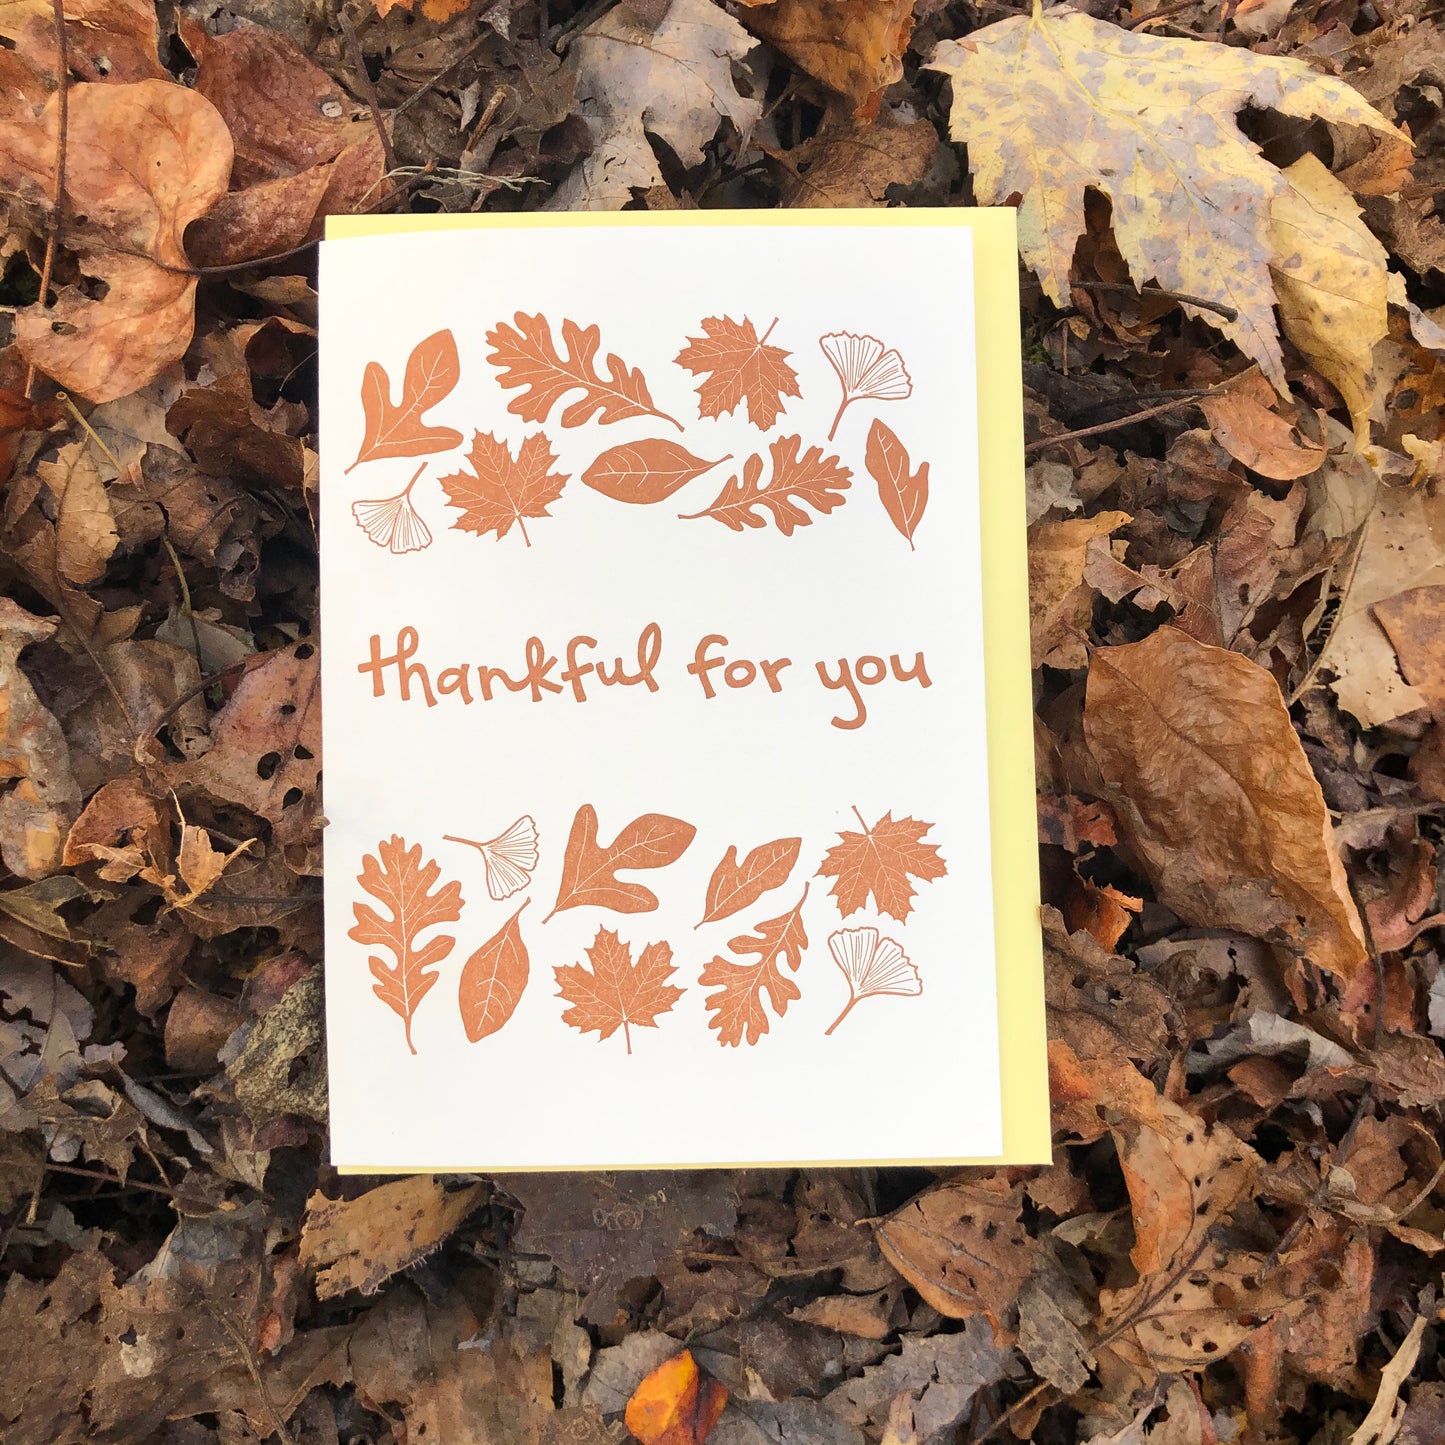 Thank You Letterpress Greeting Card: Autumn Leaves "Thankful for You"